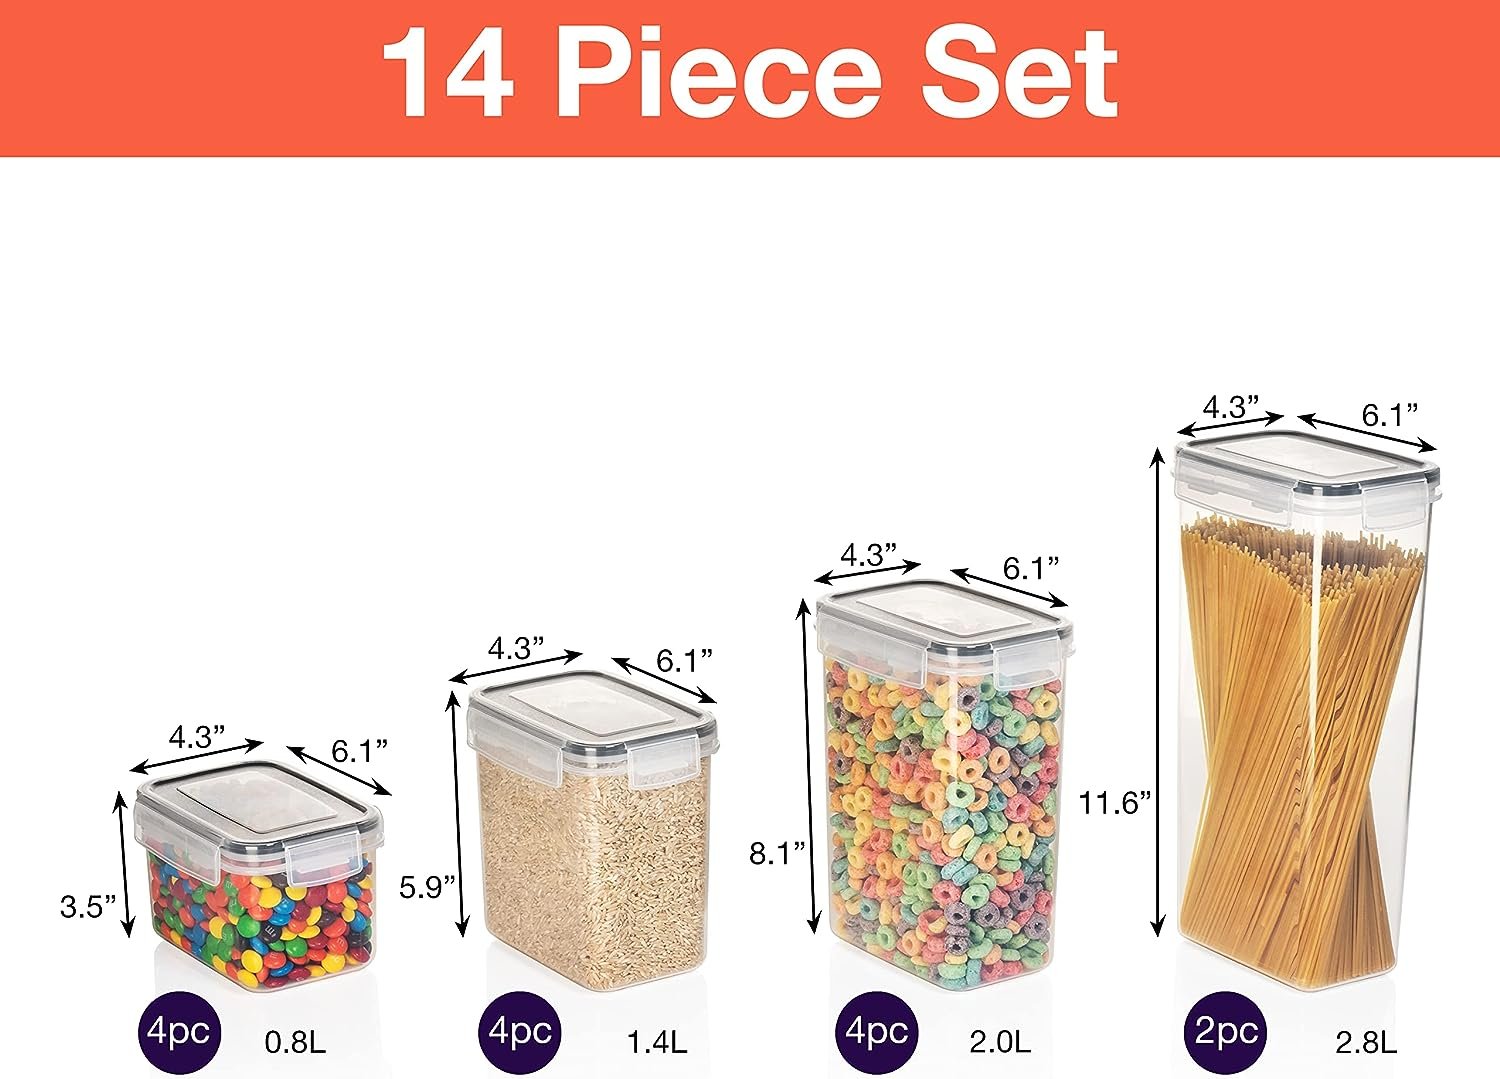 ClearSpace Airtight Food Storage Containers –14 Pack BPA Free Kitchen Organization Set for Pantry Organization and Storage, Plastic Canisters with Durable Lids Ideal for Cereal, Flour & Sugar (Black)